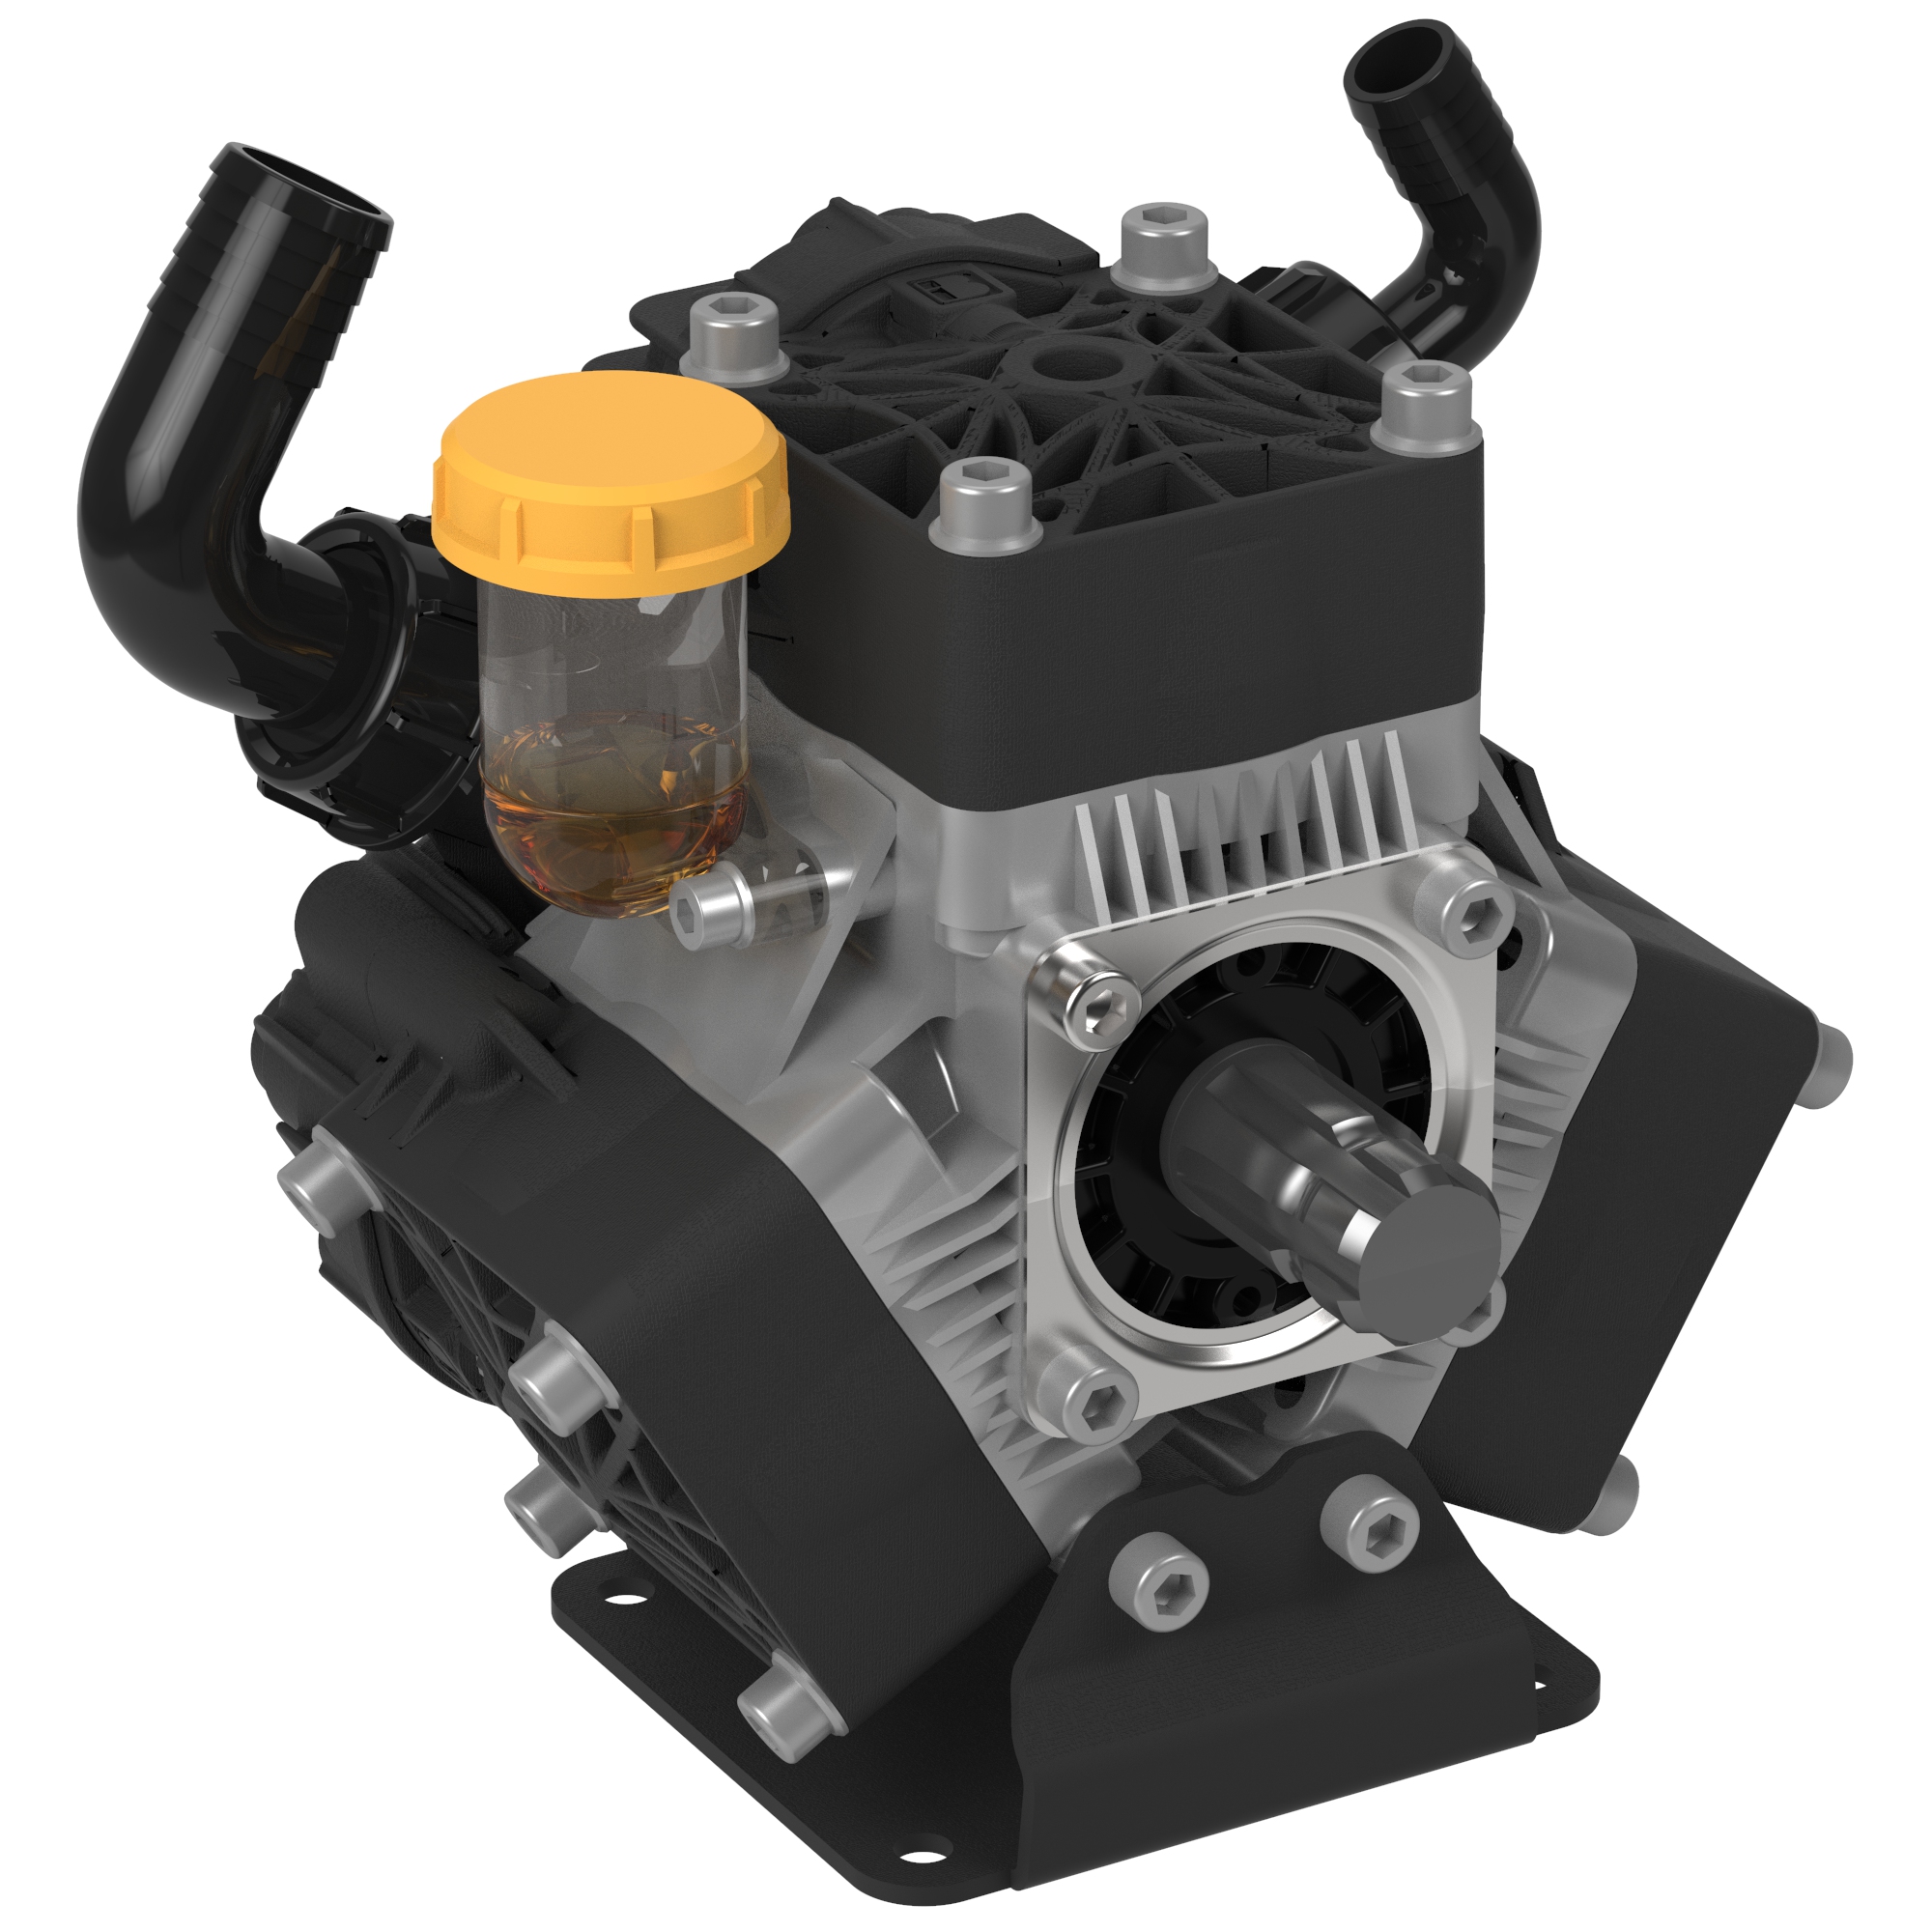 Pentair Hypro 9915 Series Low Operating Poly Pressure Diaphragm Pumps